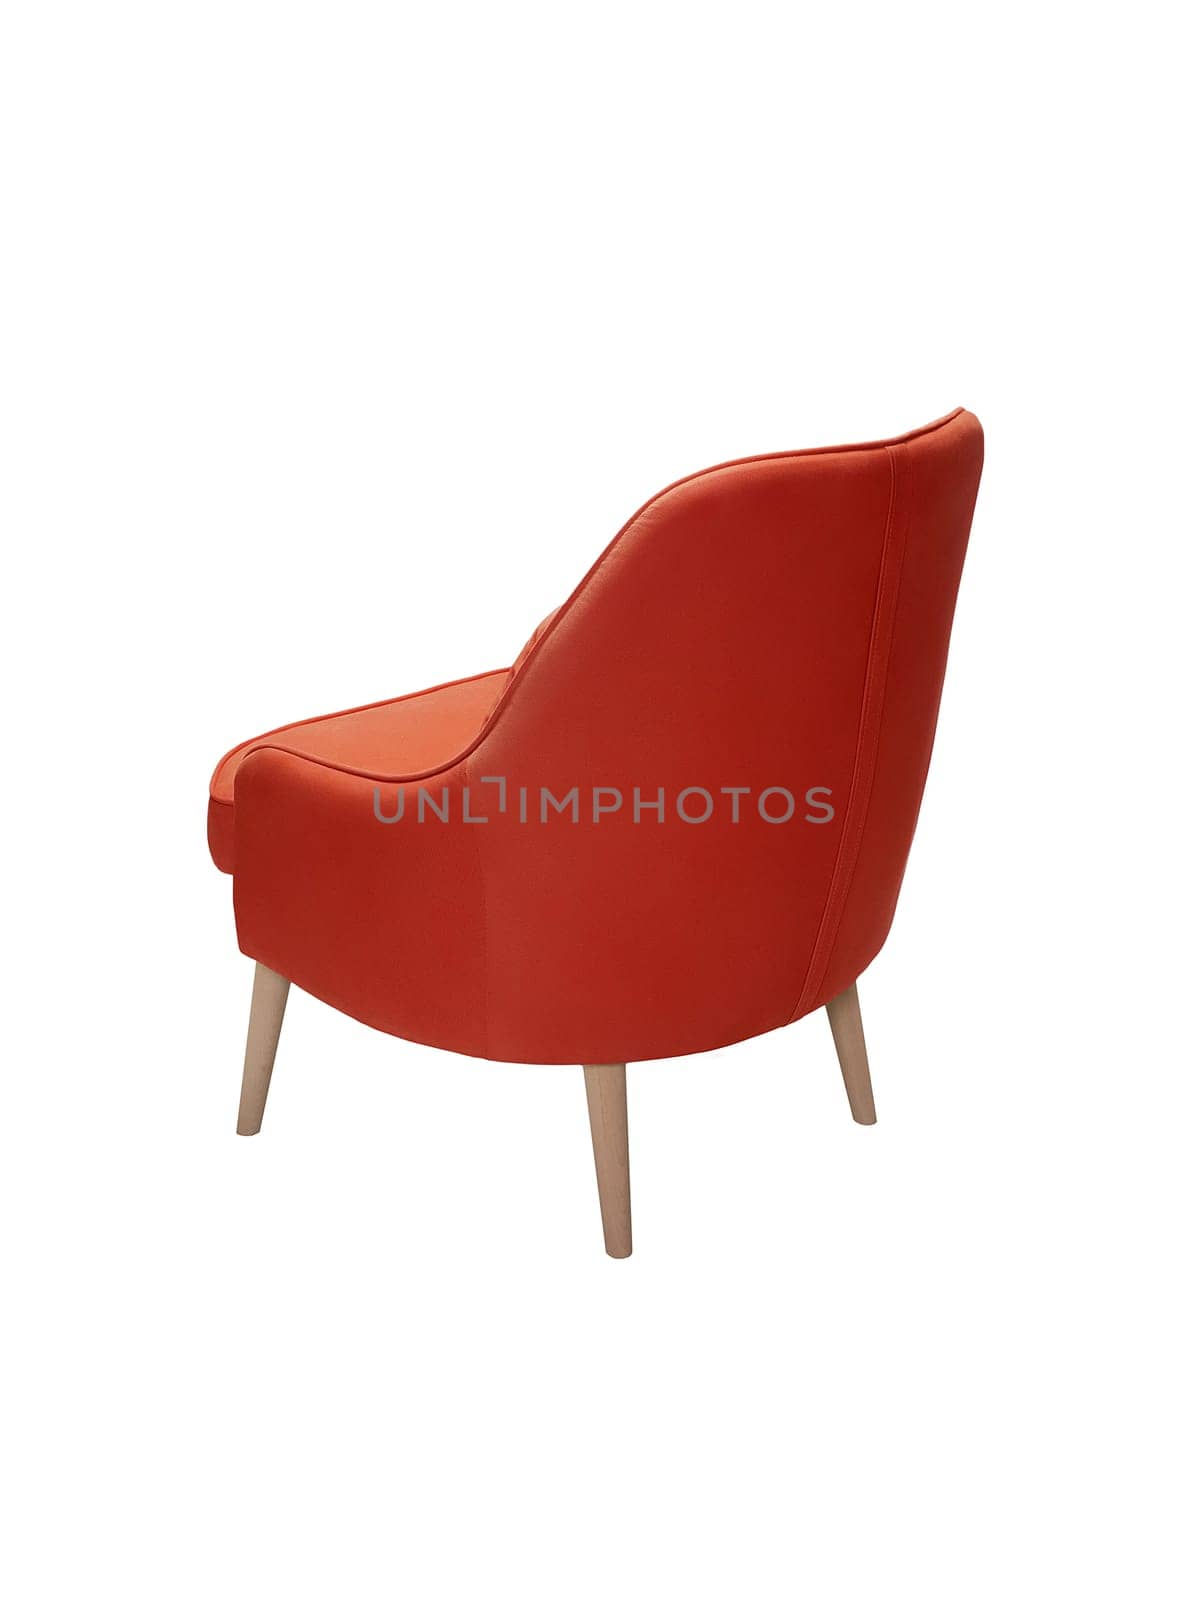 modern red fabric armchair with wooden legs isolated on white background, back view by artemzatsepilin